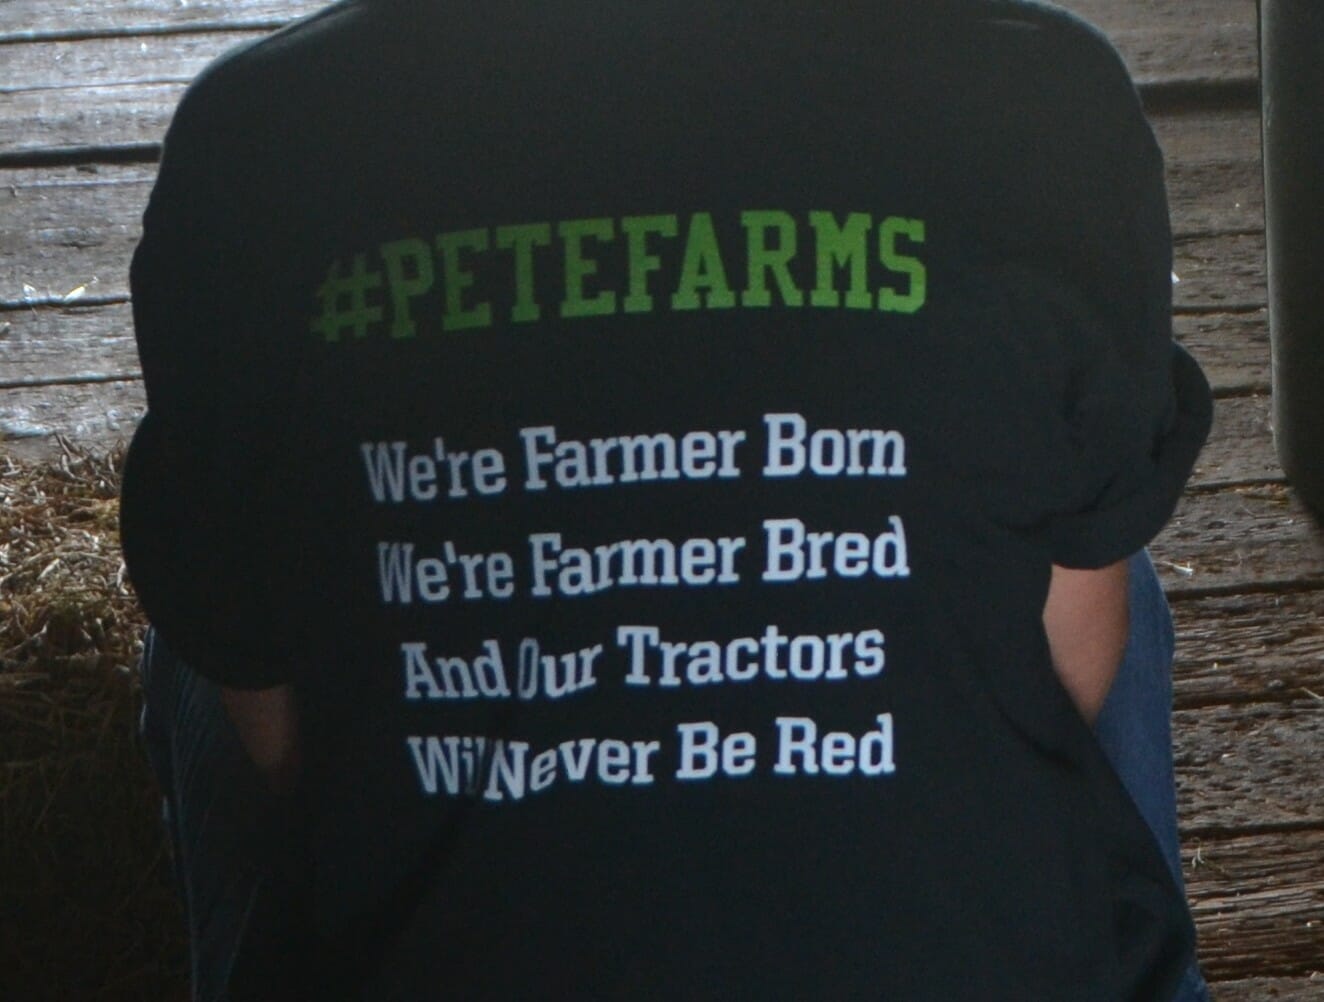 The Petersen family could easily be identified by their fashion and sense of humor.